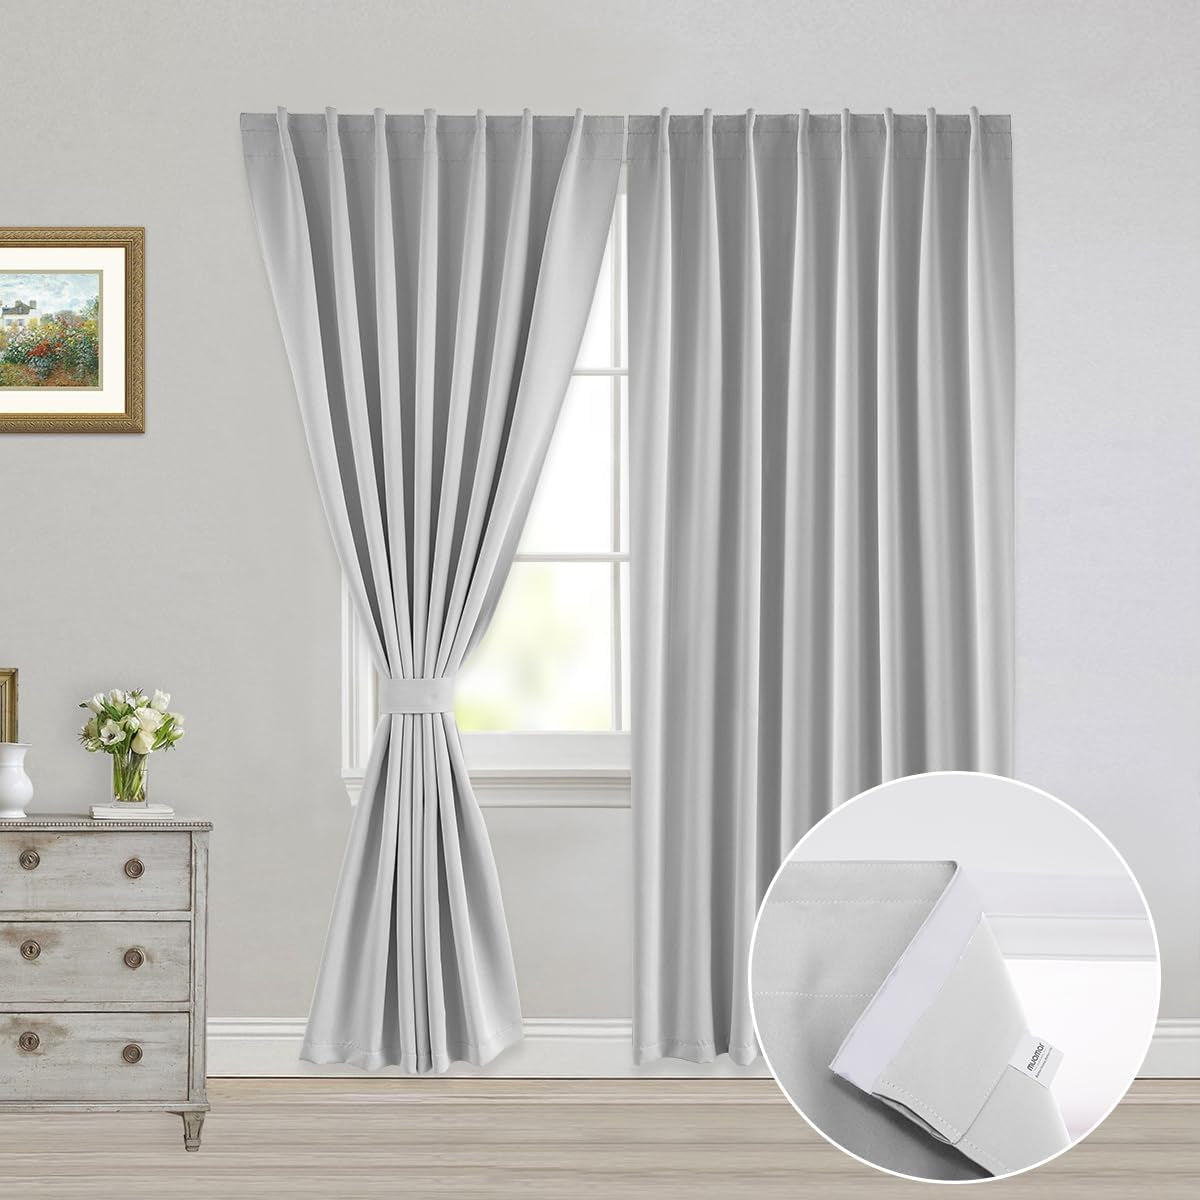 Muamar 2Pcs Blackout Curtains Privacy Curtains 63 Inch Length Window Curtains,Easy Install Thermal Insulated Window Shades,Stick Curtains No Rods, Black 42" W X 63" L  Muamar White 52"W X 84"L 